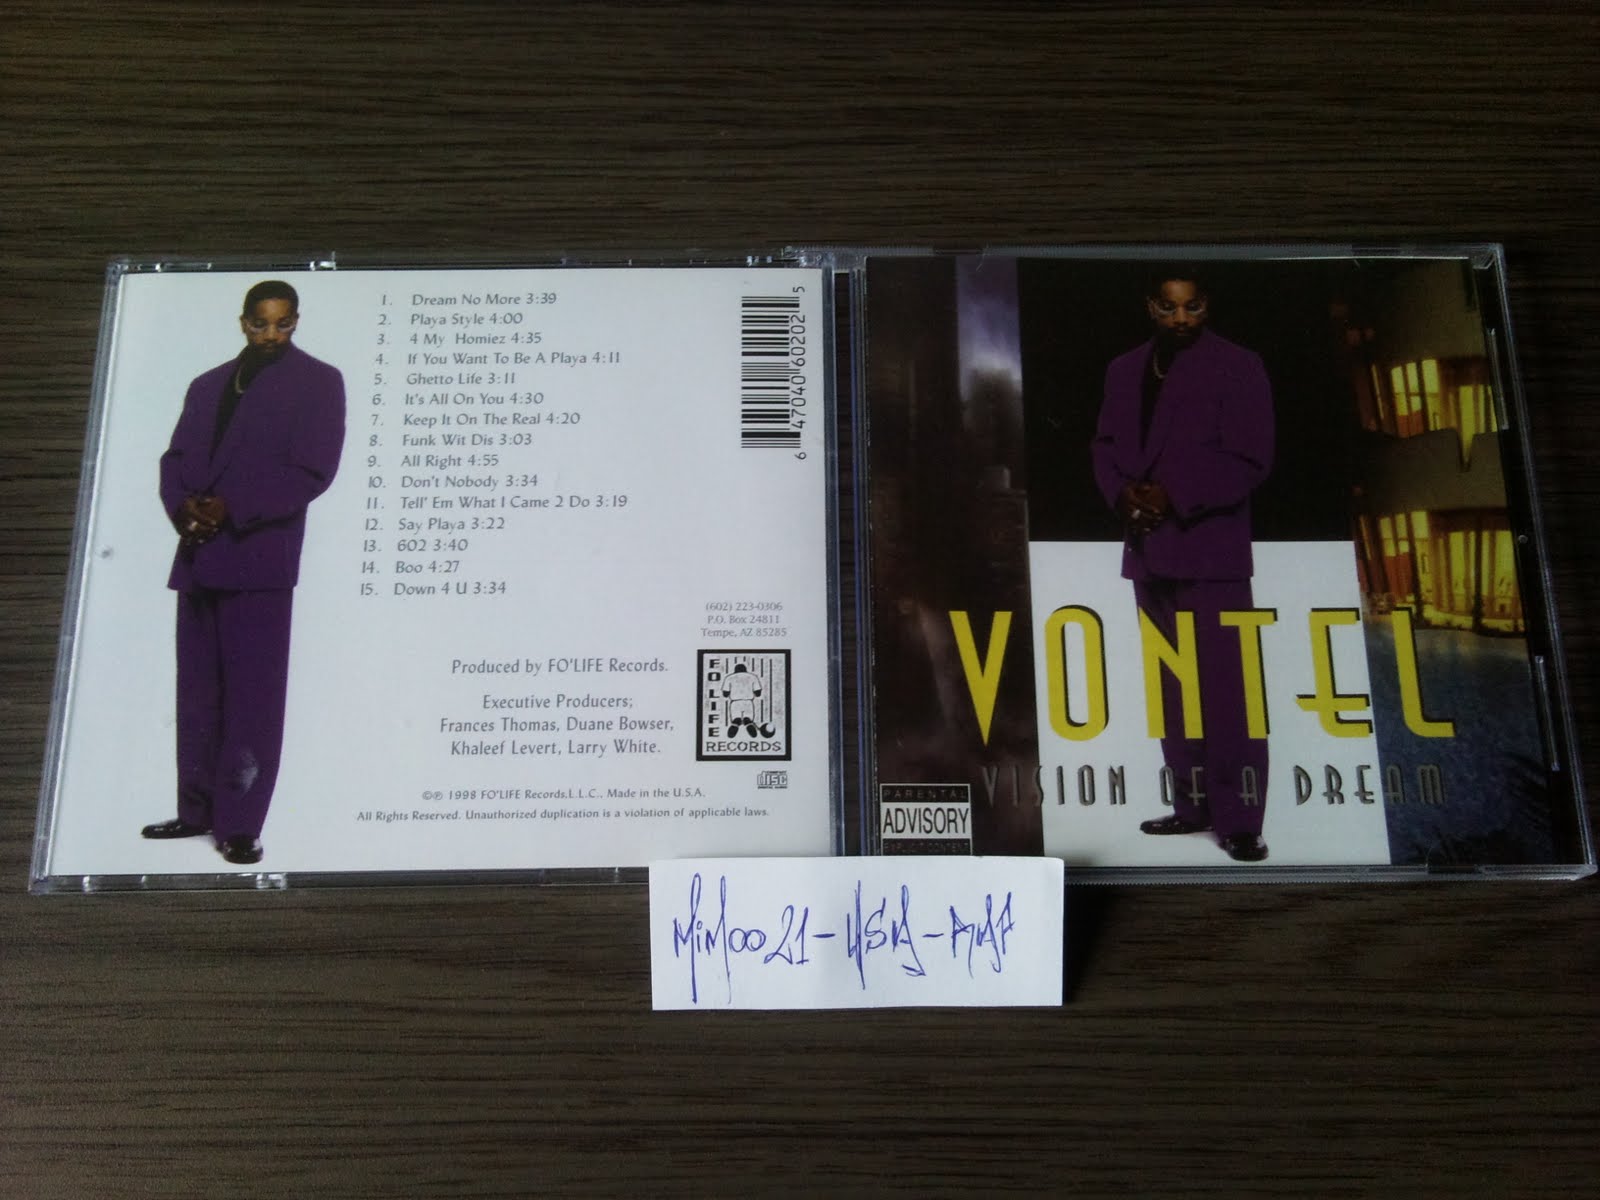 mimoo21-only-usa-rap: Vontel - Vision Of A Dream (1998)